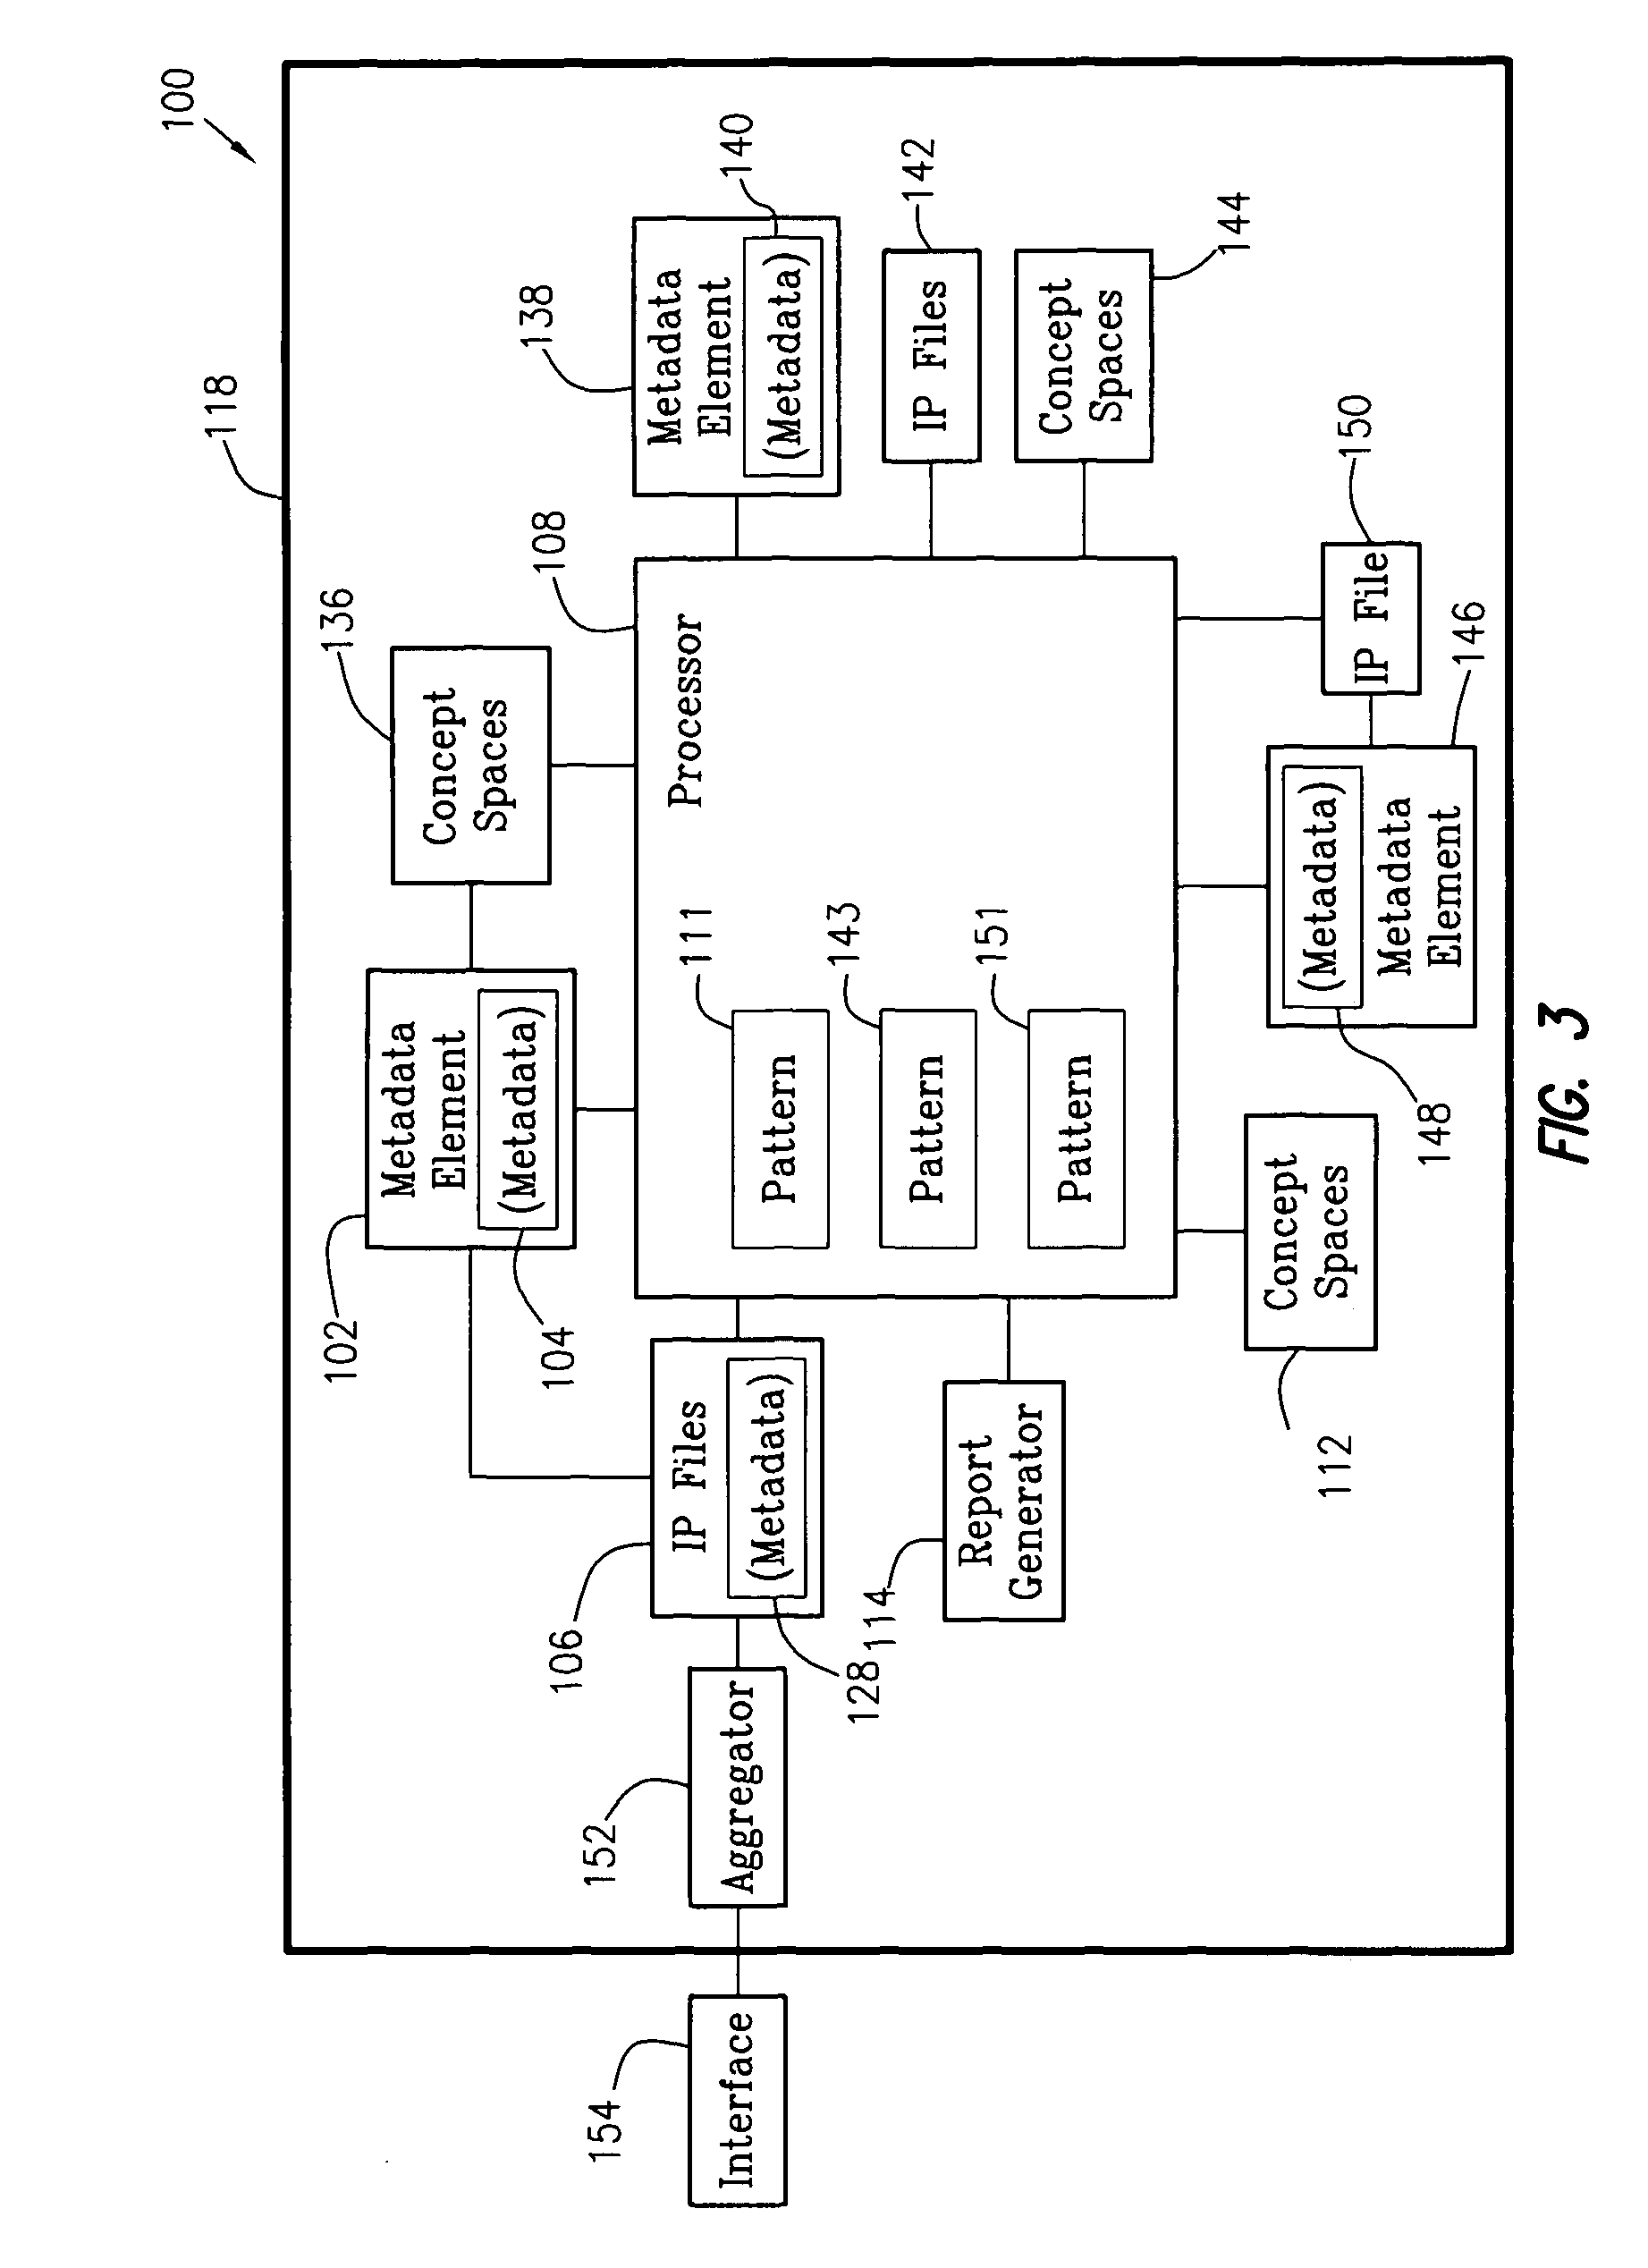 Method and system for monitoring innovation activity